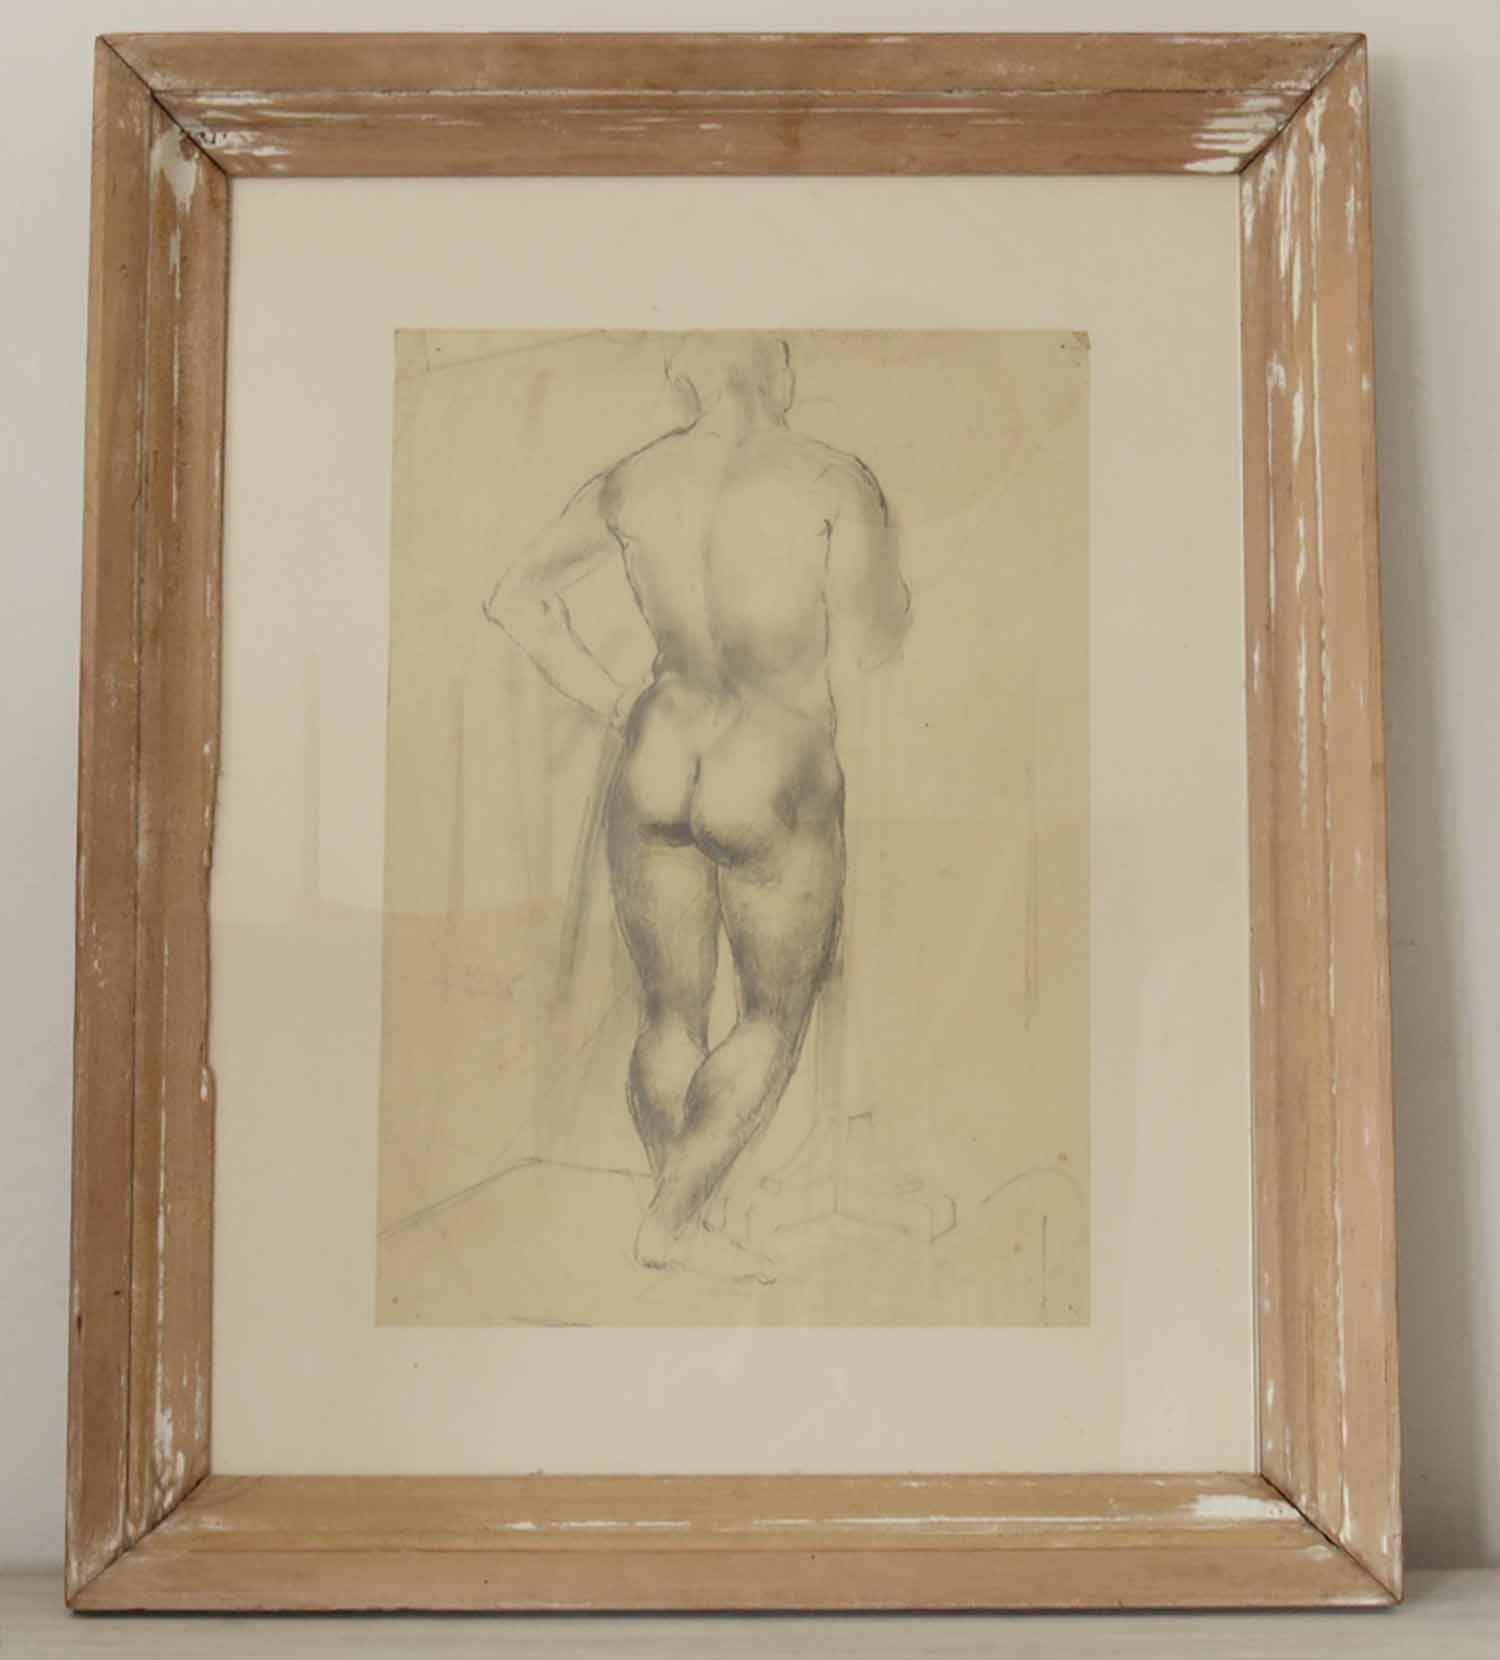 Wonderful pencil and ink drawing of a male nude.

On paper. Unsigned.

Presented in an antique distressed pine frame.

The actual paper is not perfect. It is creased in places, drawing pin holes in the corners and detached from the backing